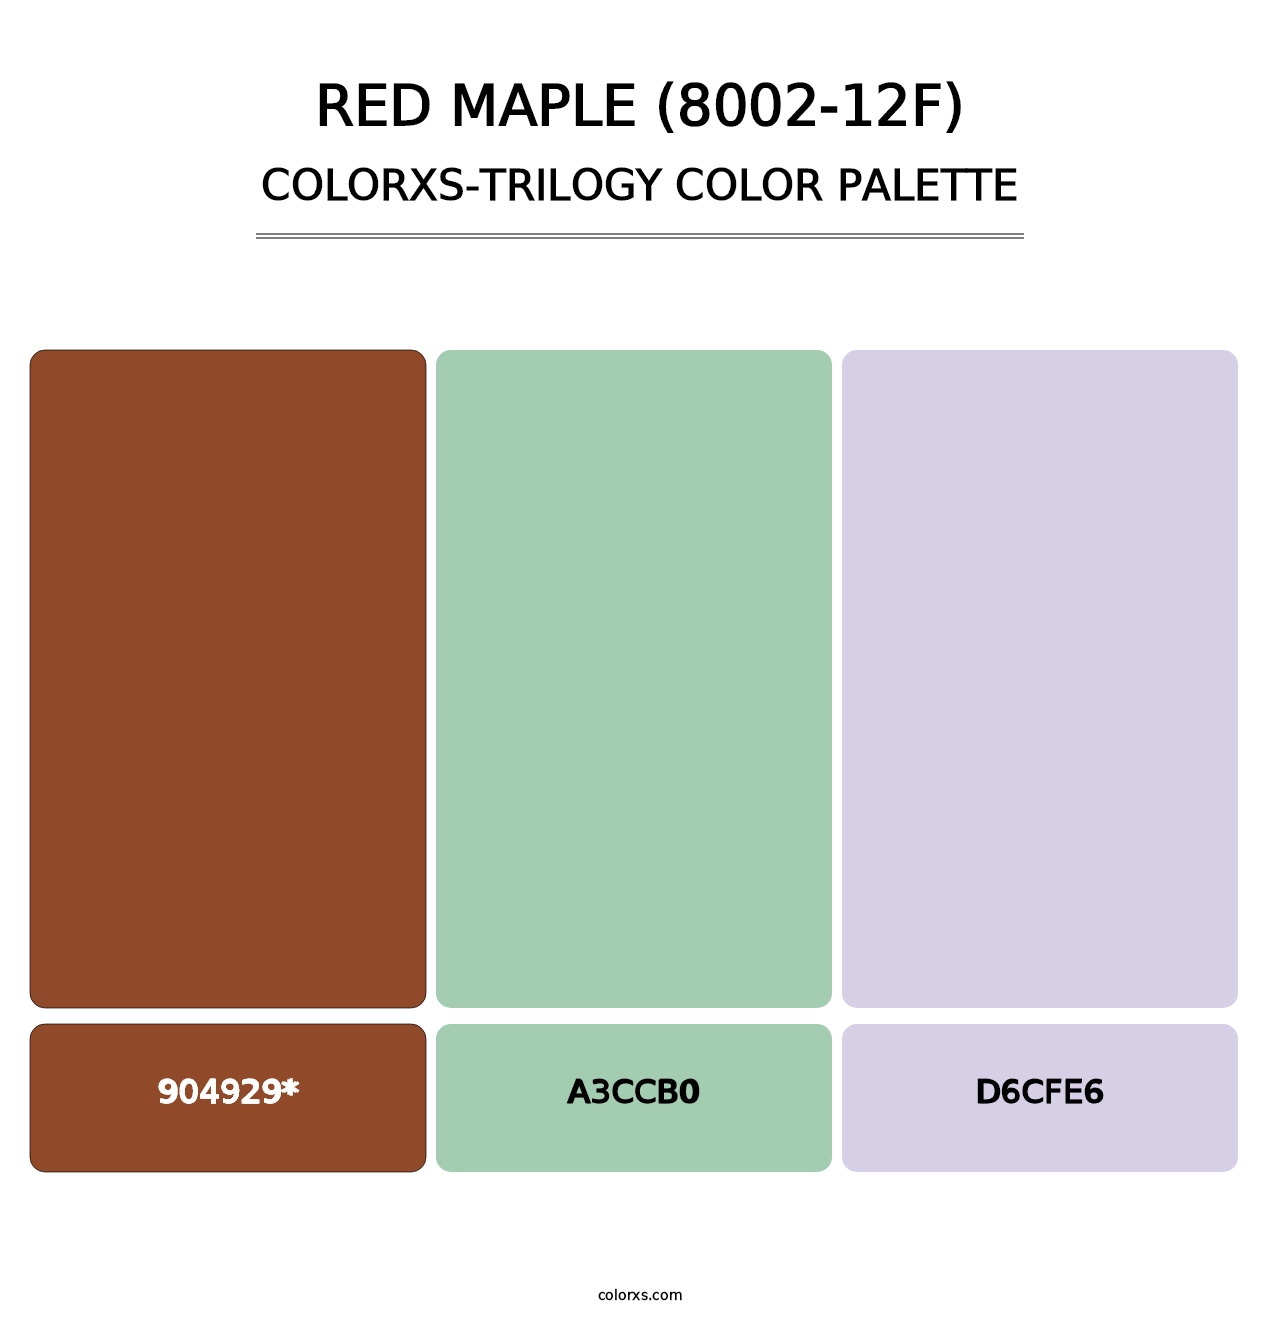 Red Maple (8002-12F) - Colorxs Trilogy Palette